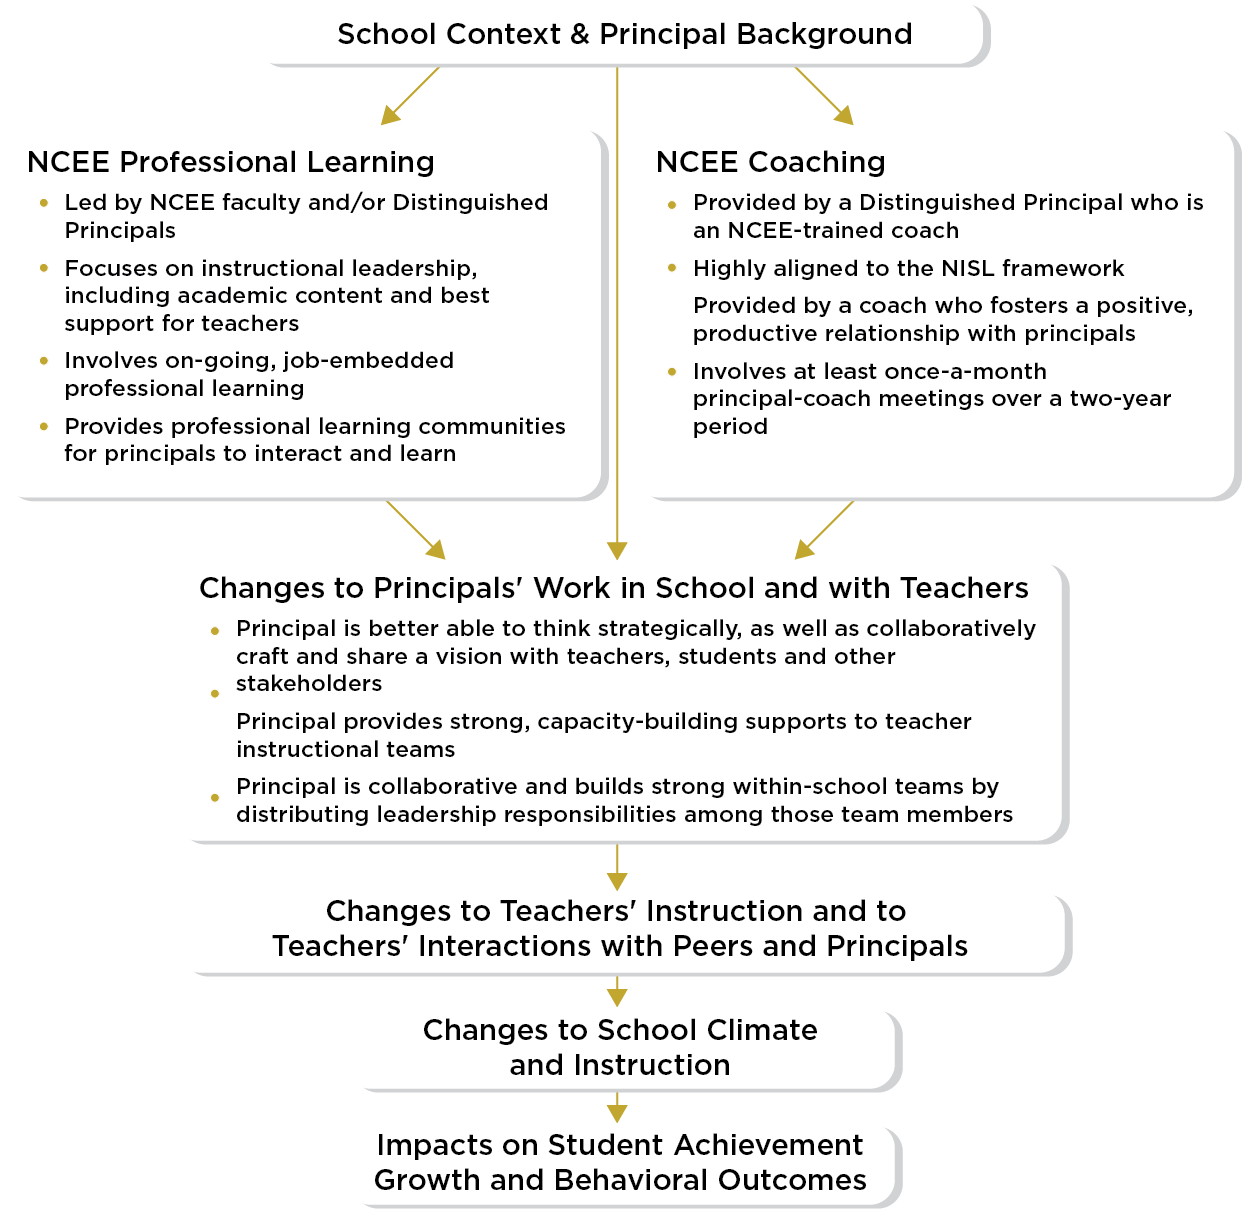 Theory of Change for Impacts on School Effectiveness